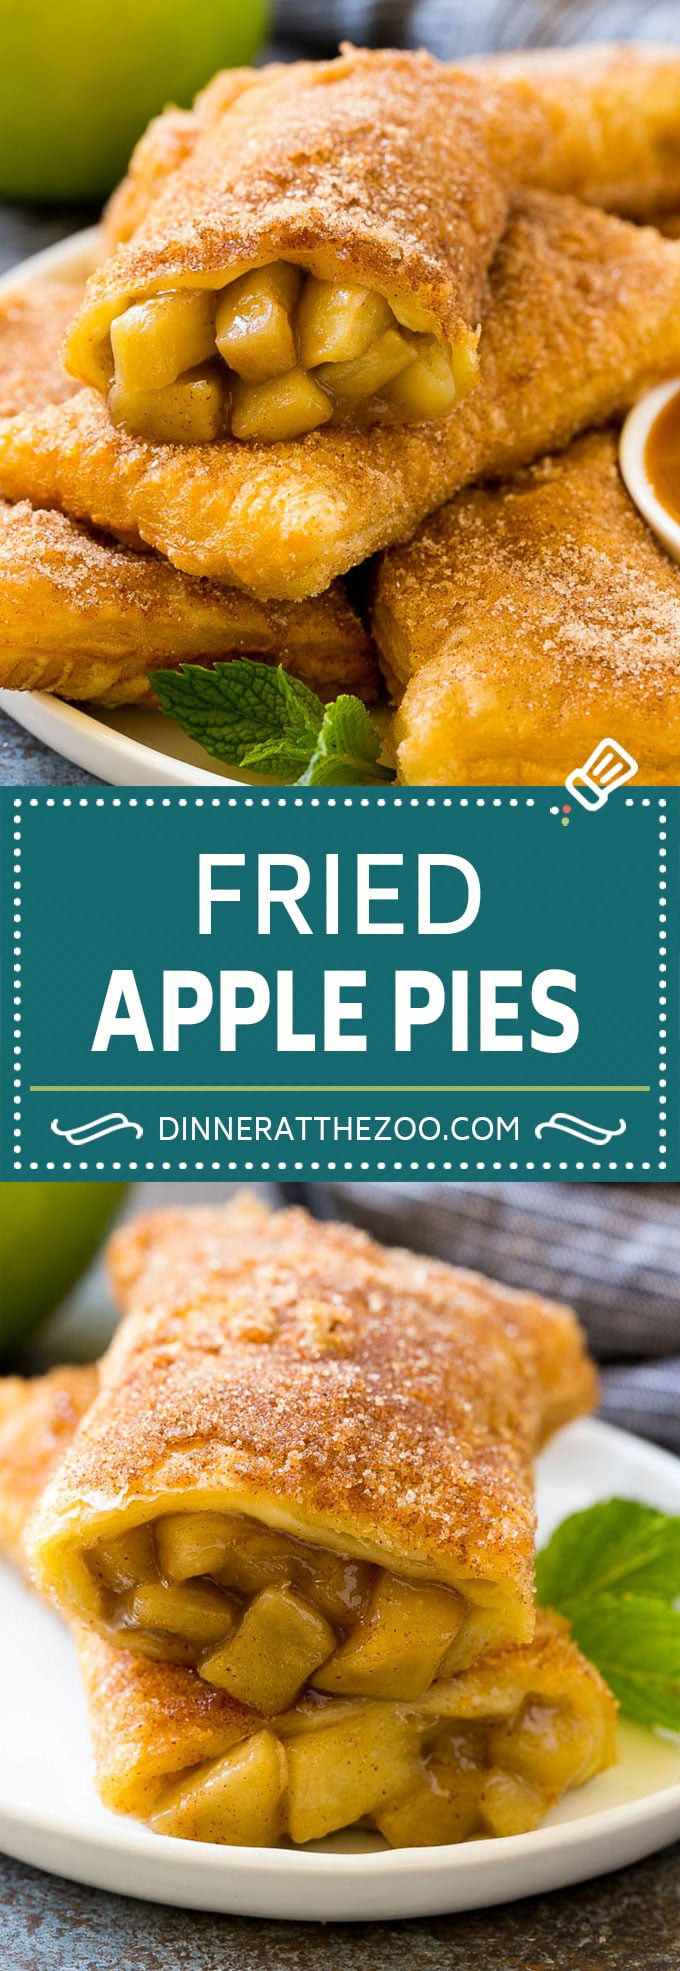 Deep Fried Apple Pie
 Fried Apple Pies Dinner at the Zoo